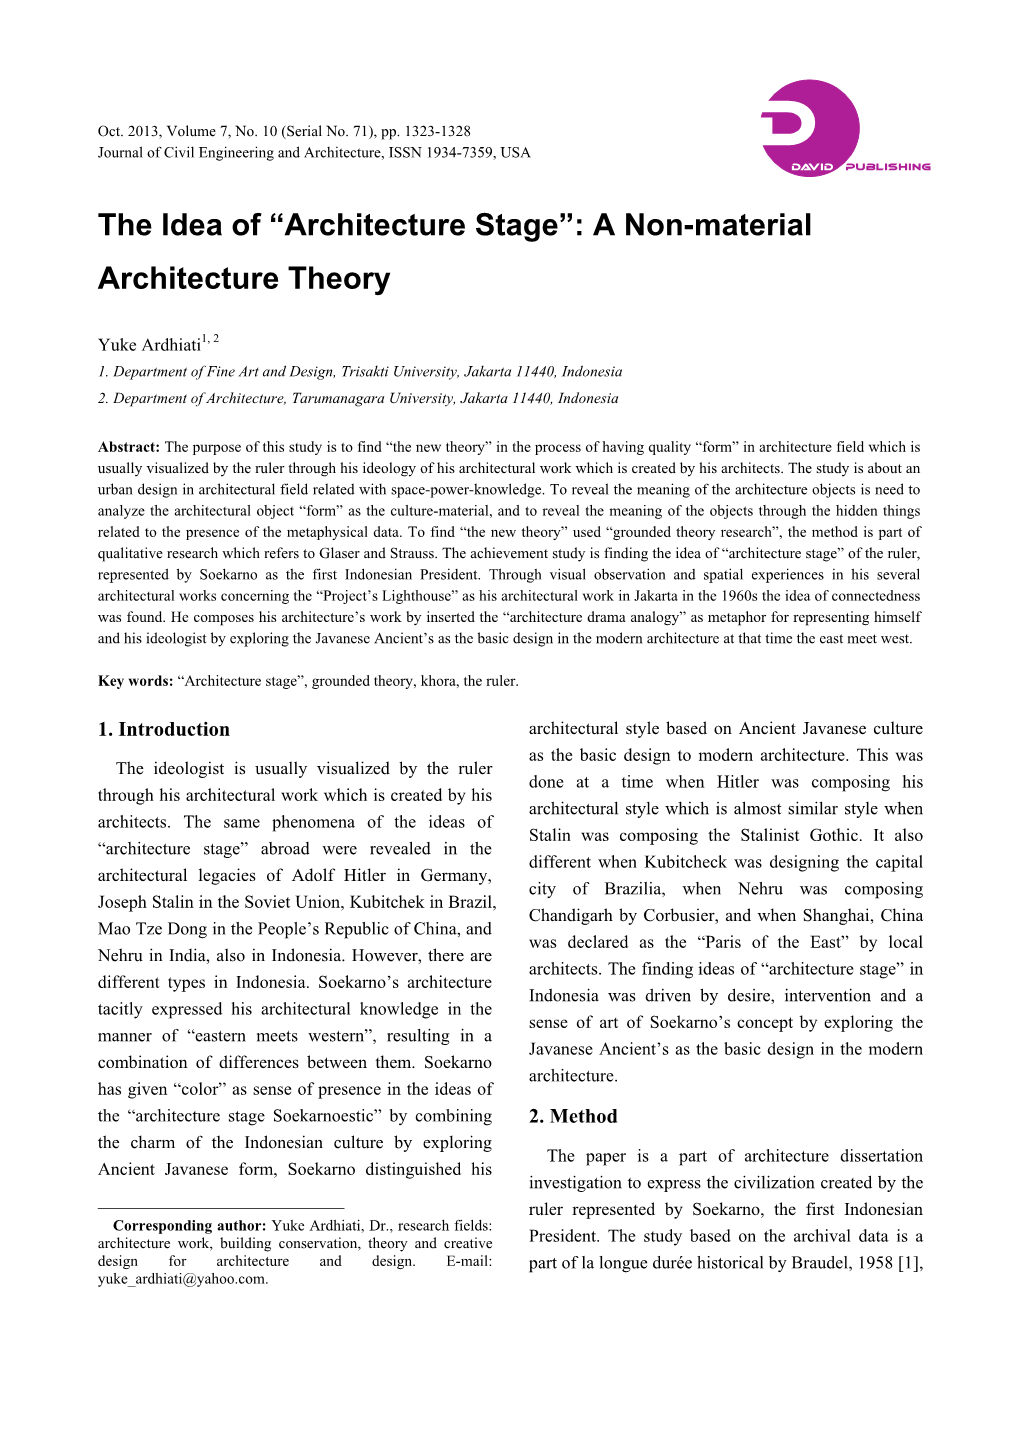 Architecture Stage”: a Non-Material Architecture Theory